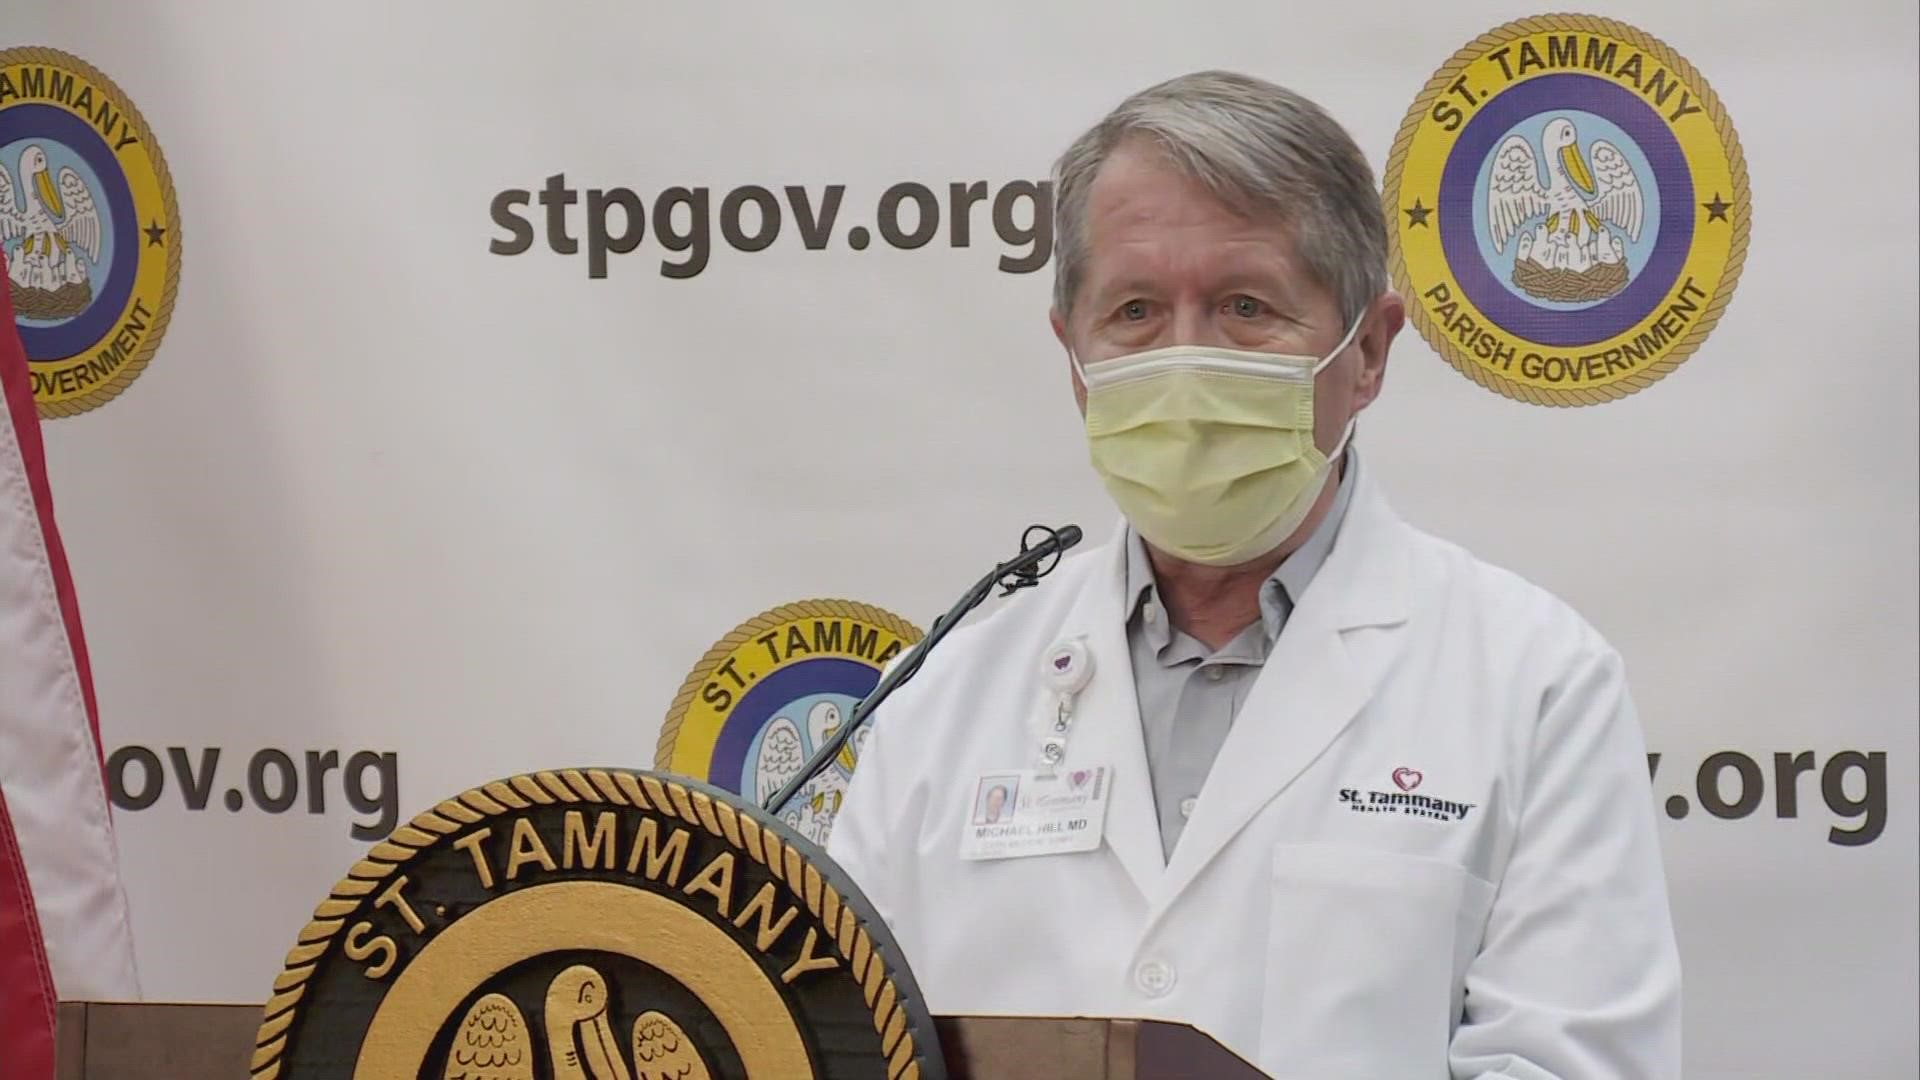 St. Tammany Parish is running low on medical resources due to the fourth COVID surge. Parish medical leaders are calling for masks and vaccinations.